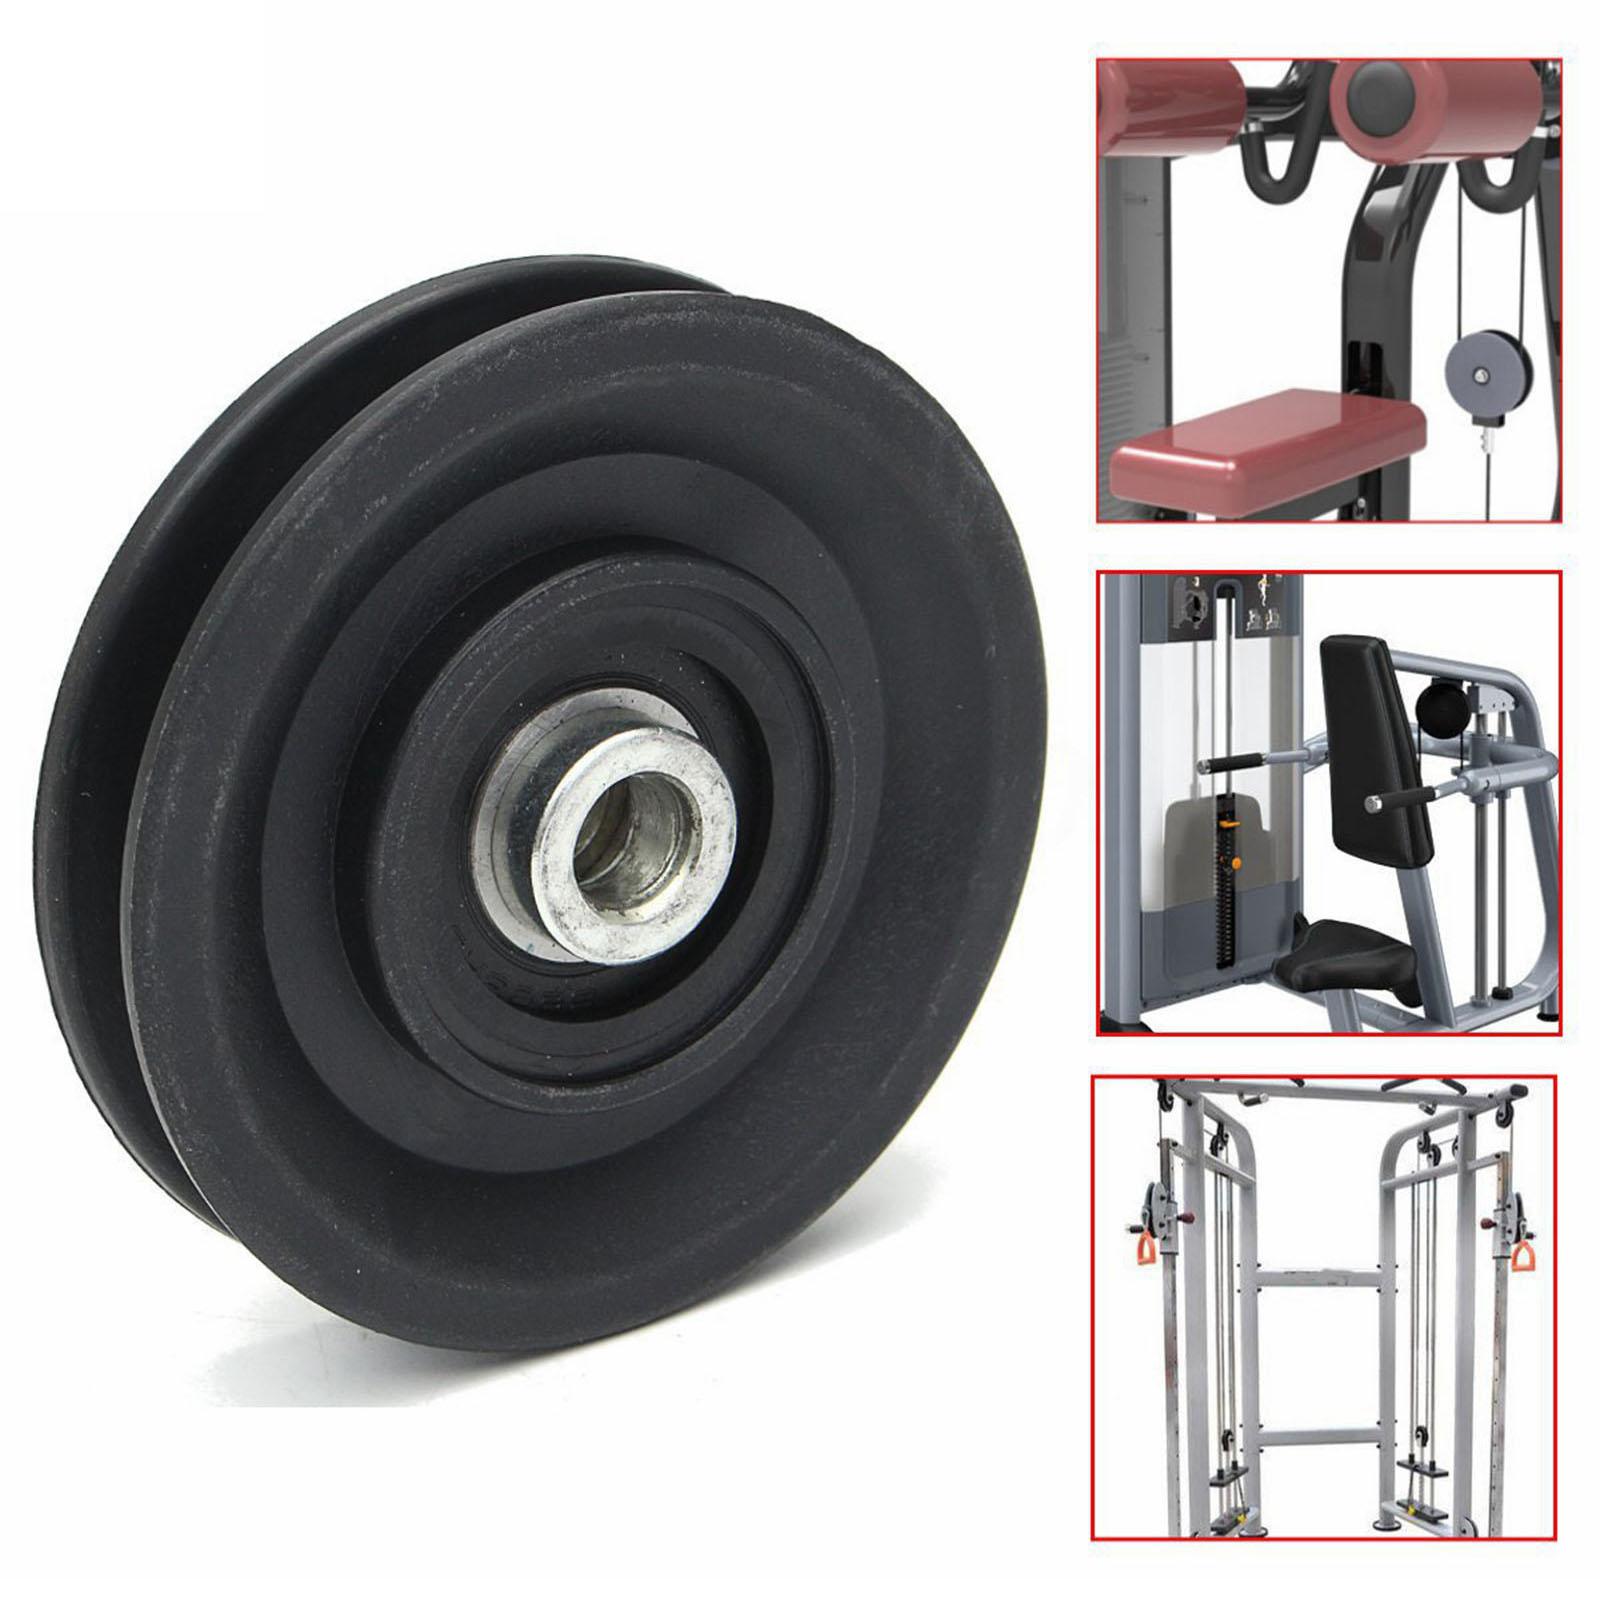 Universal Nylon Bearing Pulley Wheel for Fitness Equipment Cable Machine